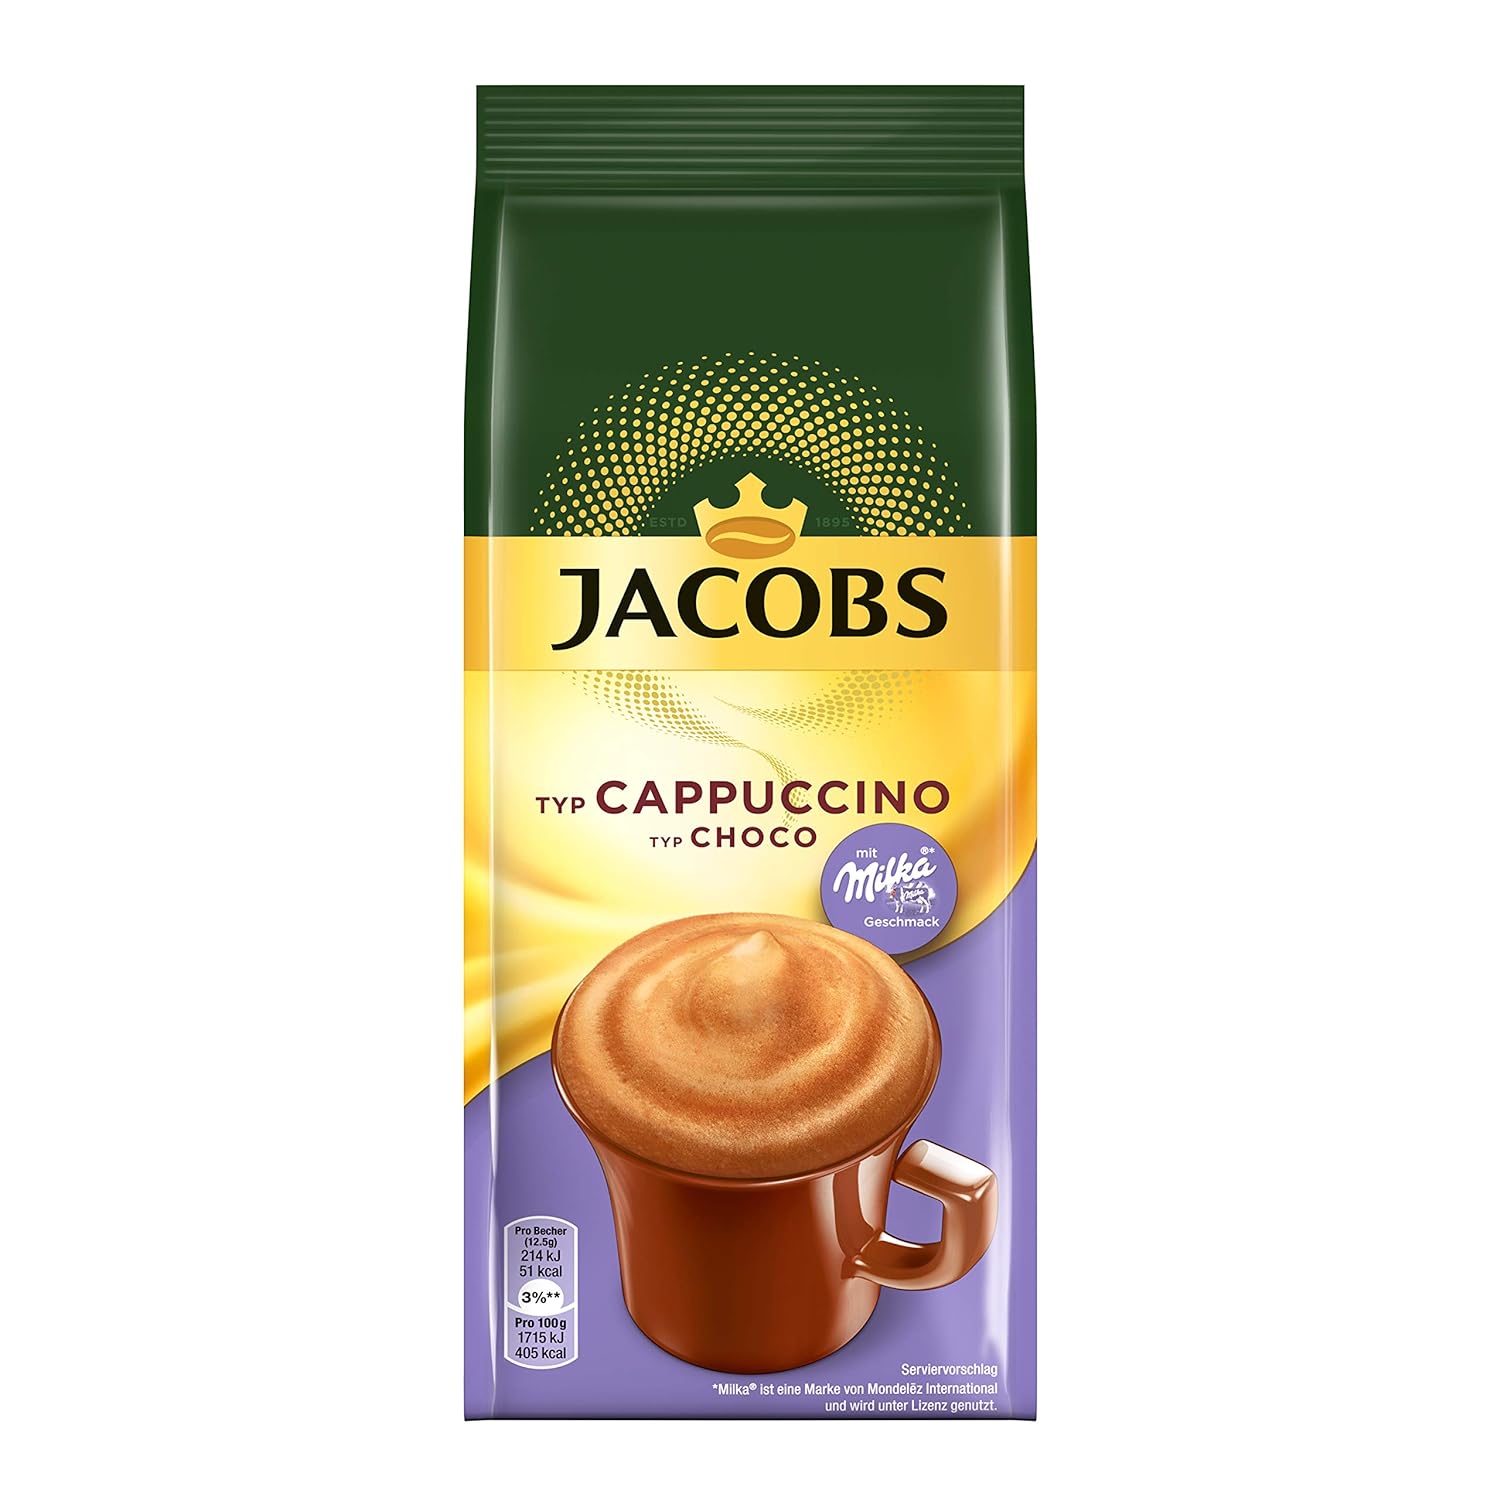 Jacobs Cappuccino Choco, Coffee Specialty, 500 g refill bag